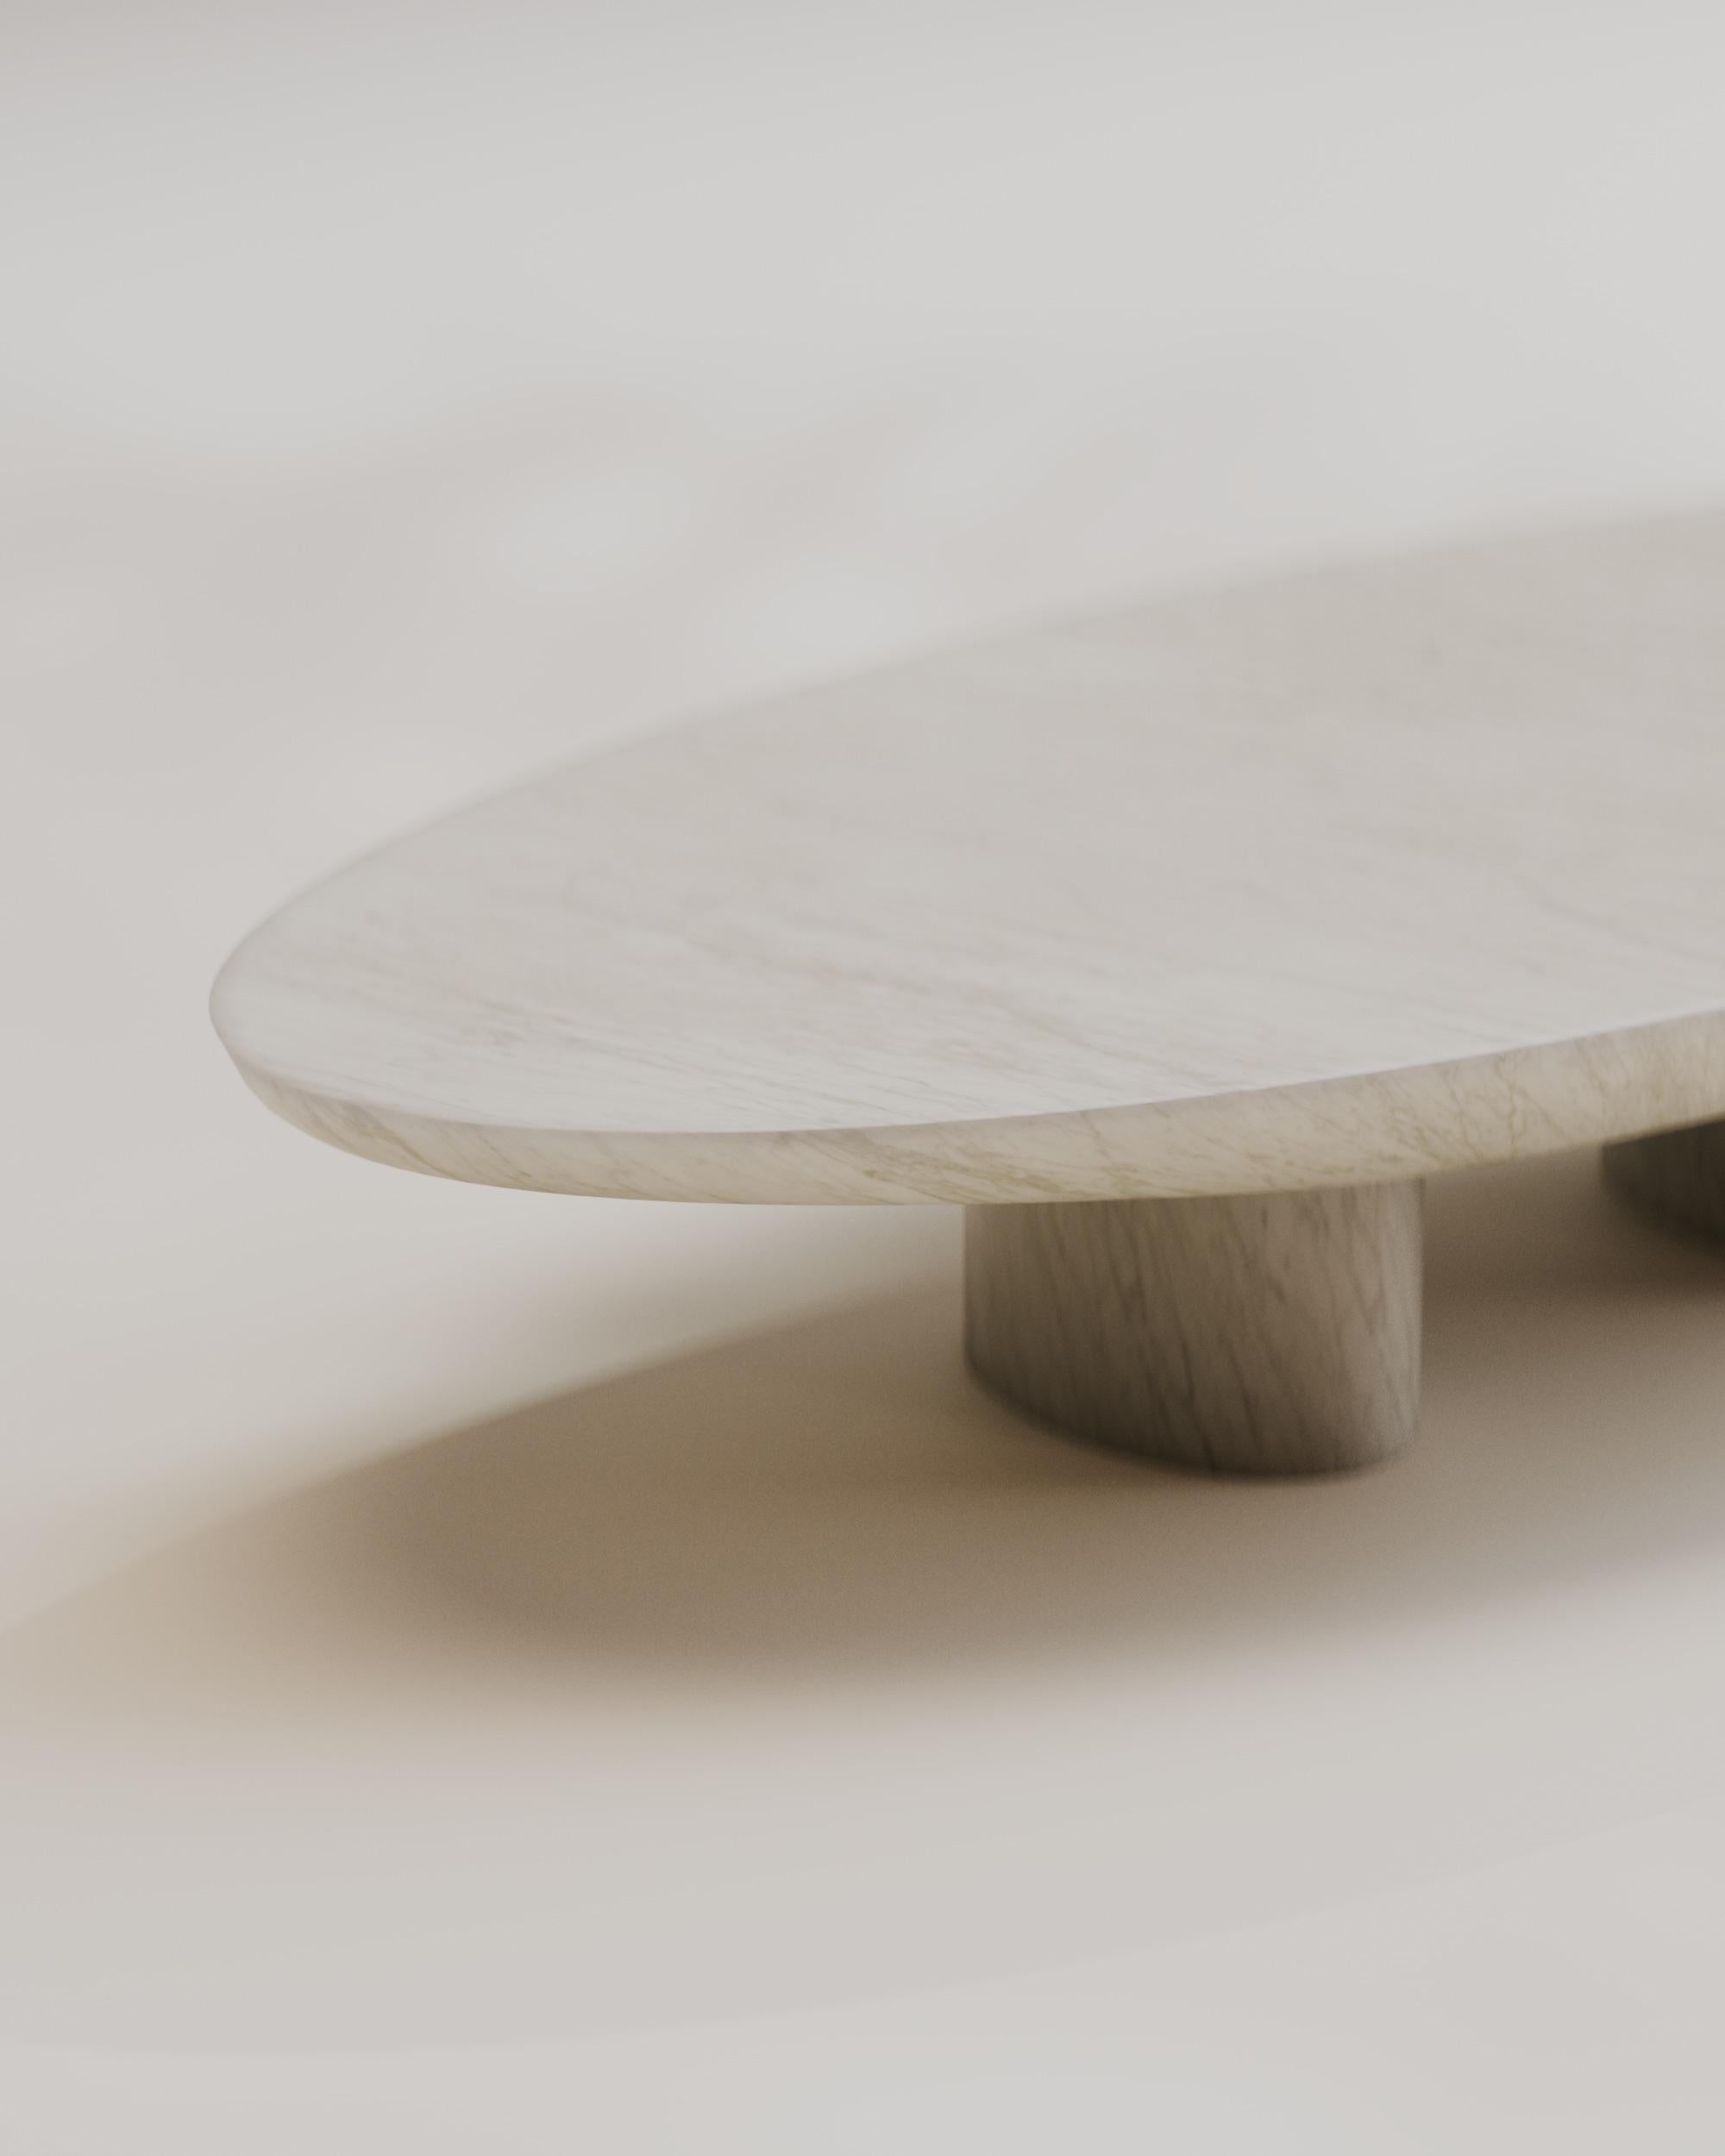 Hand-Crafted Solid White Marble Abraccio Oval Coffee Table 140 by Studio Narra For Sale